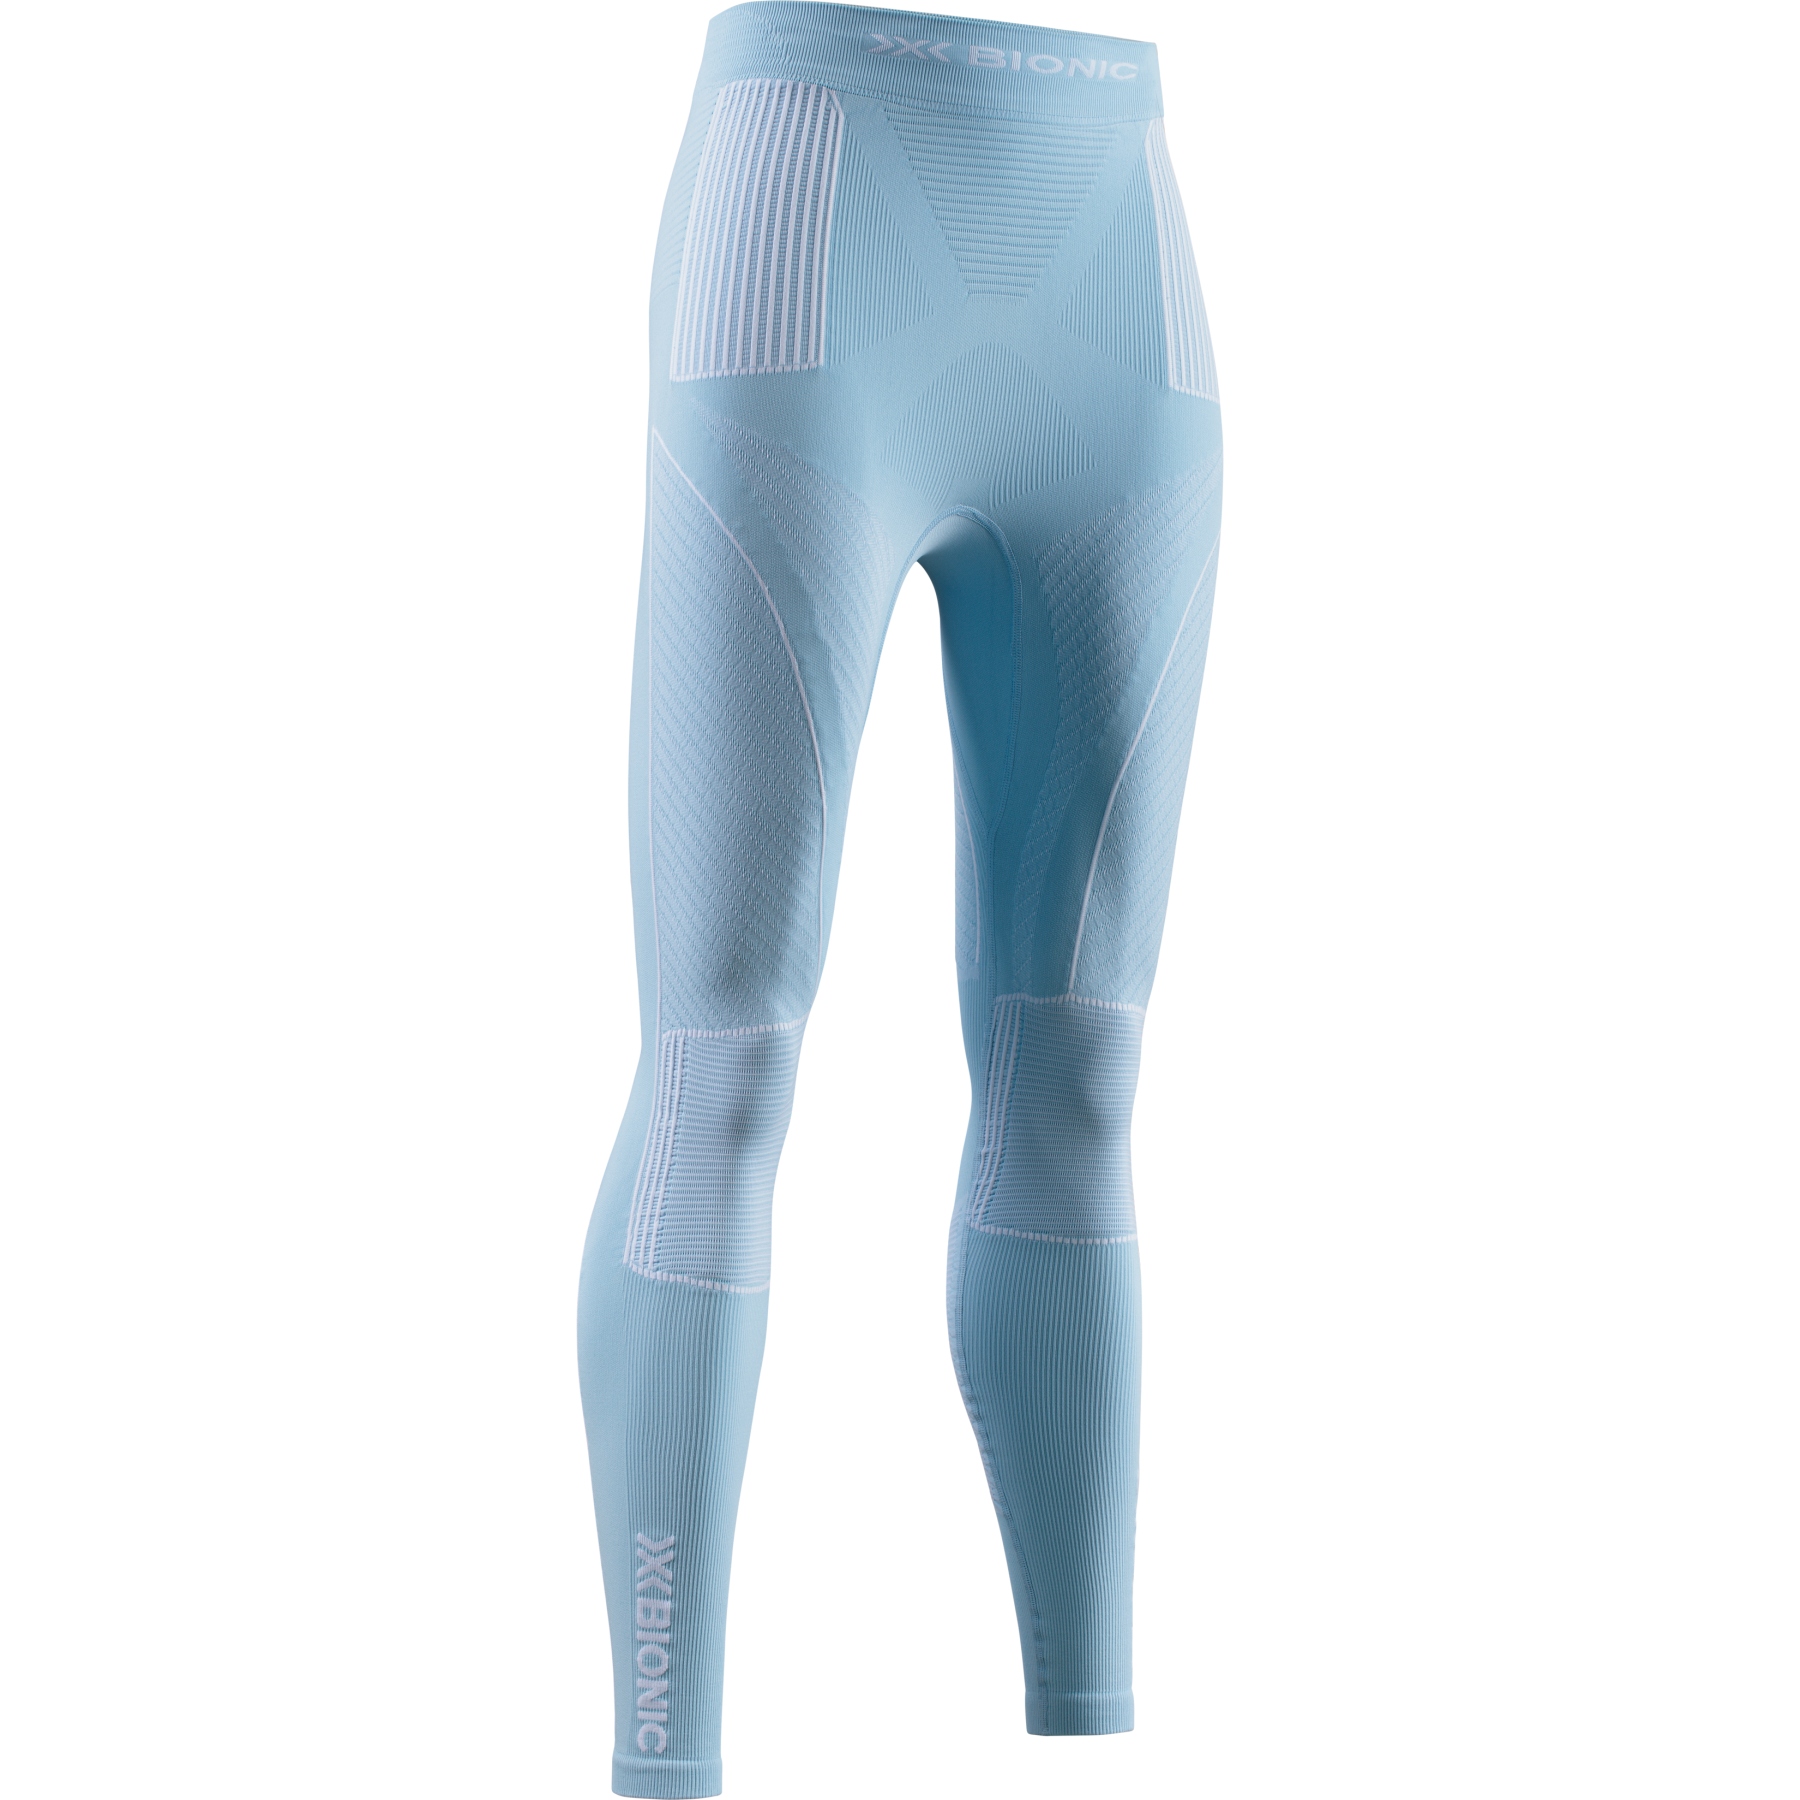 Picture of X-Bionic Energy Accumulator 4.0 Baselayer Pants Women - ice blue/arctic white